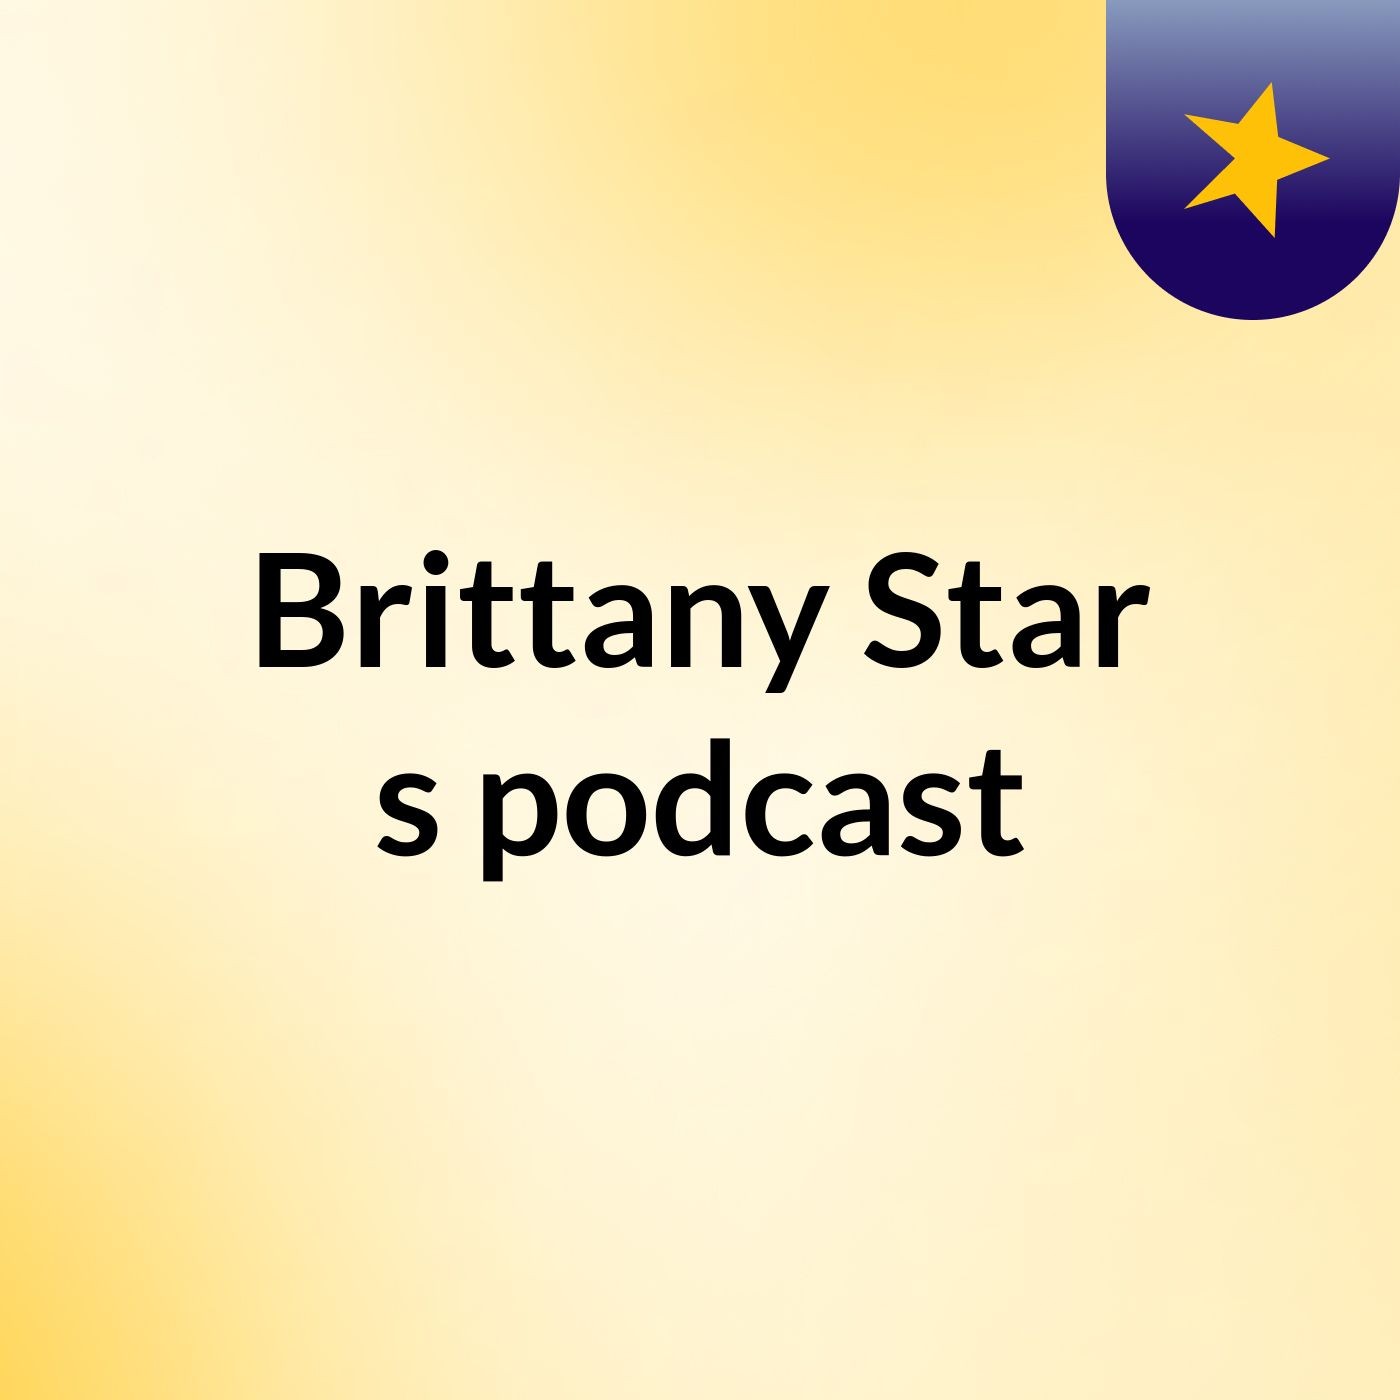 Brittany Star's podcast